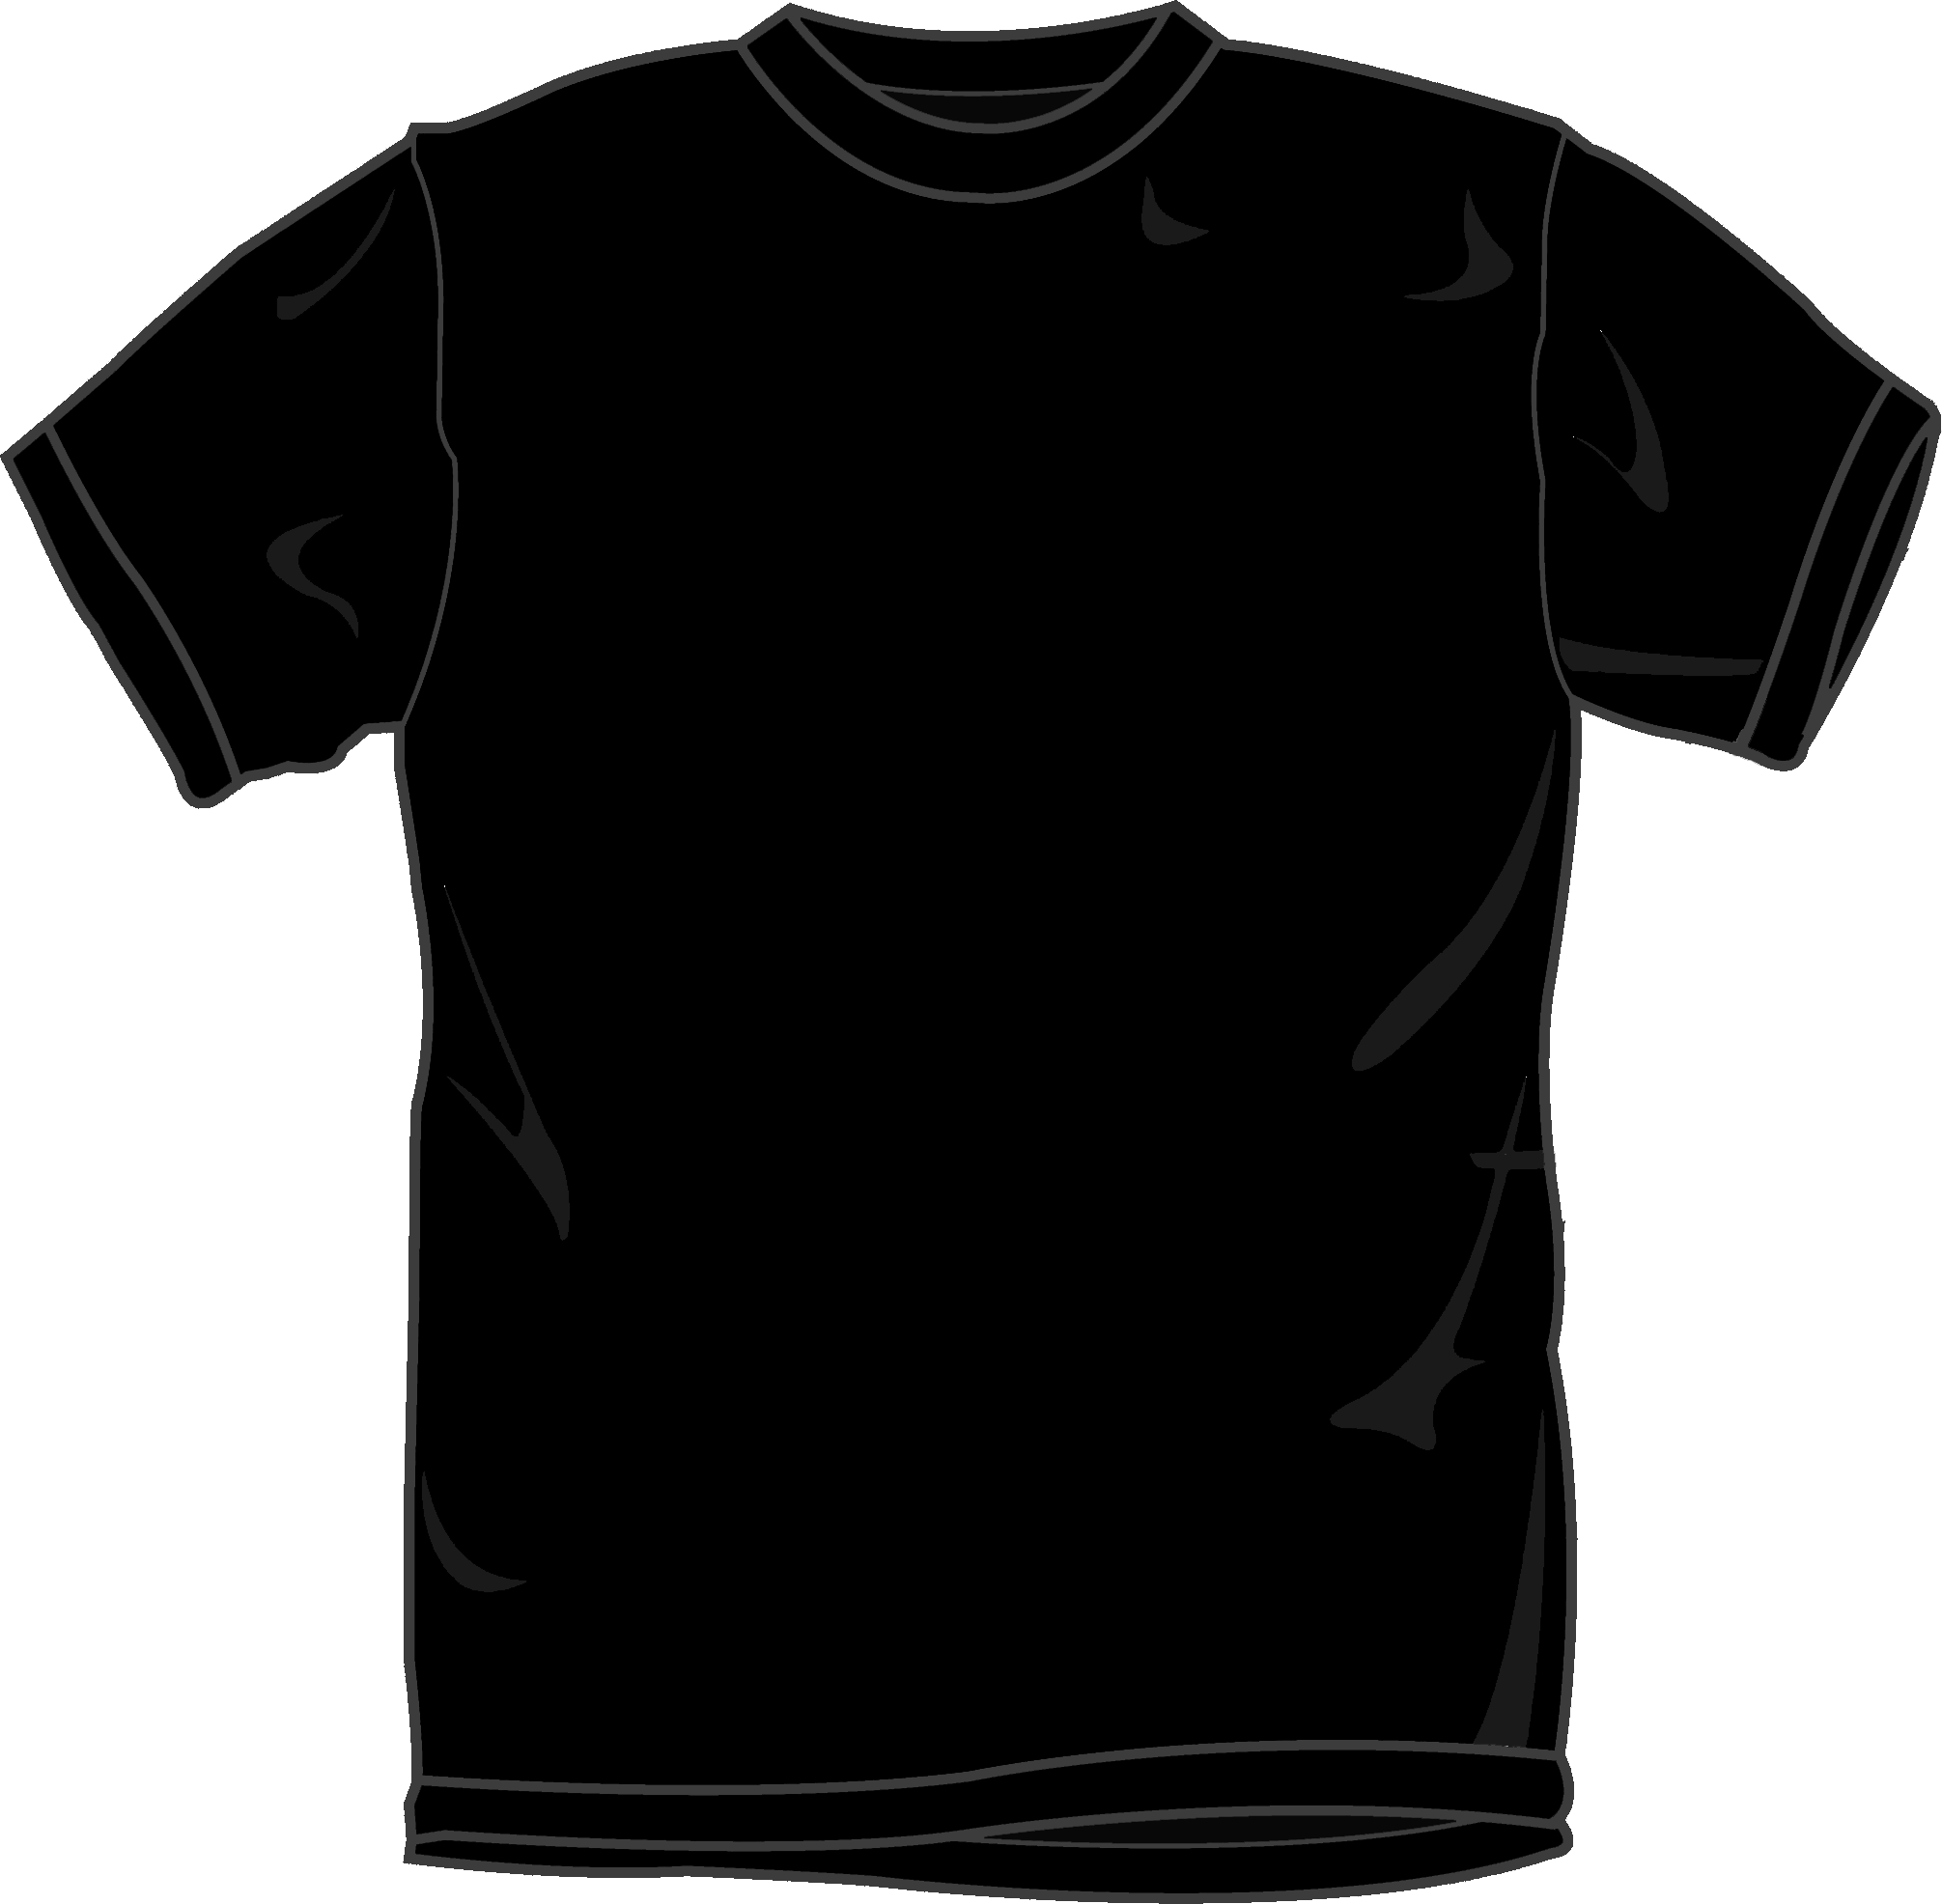 Black T Shirt Template Front And Back - ClipArt Best - ClipArt Best